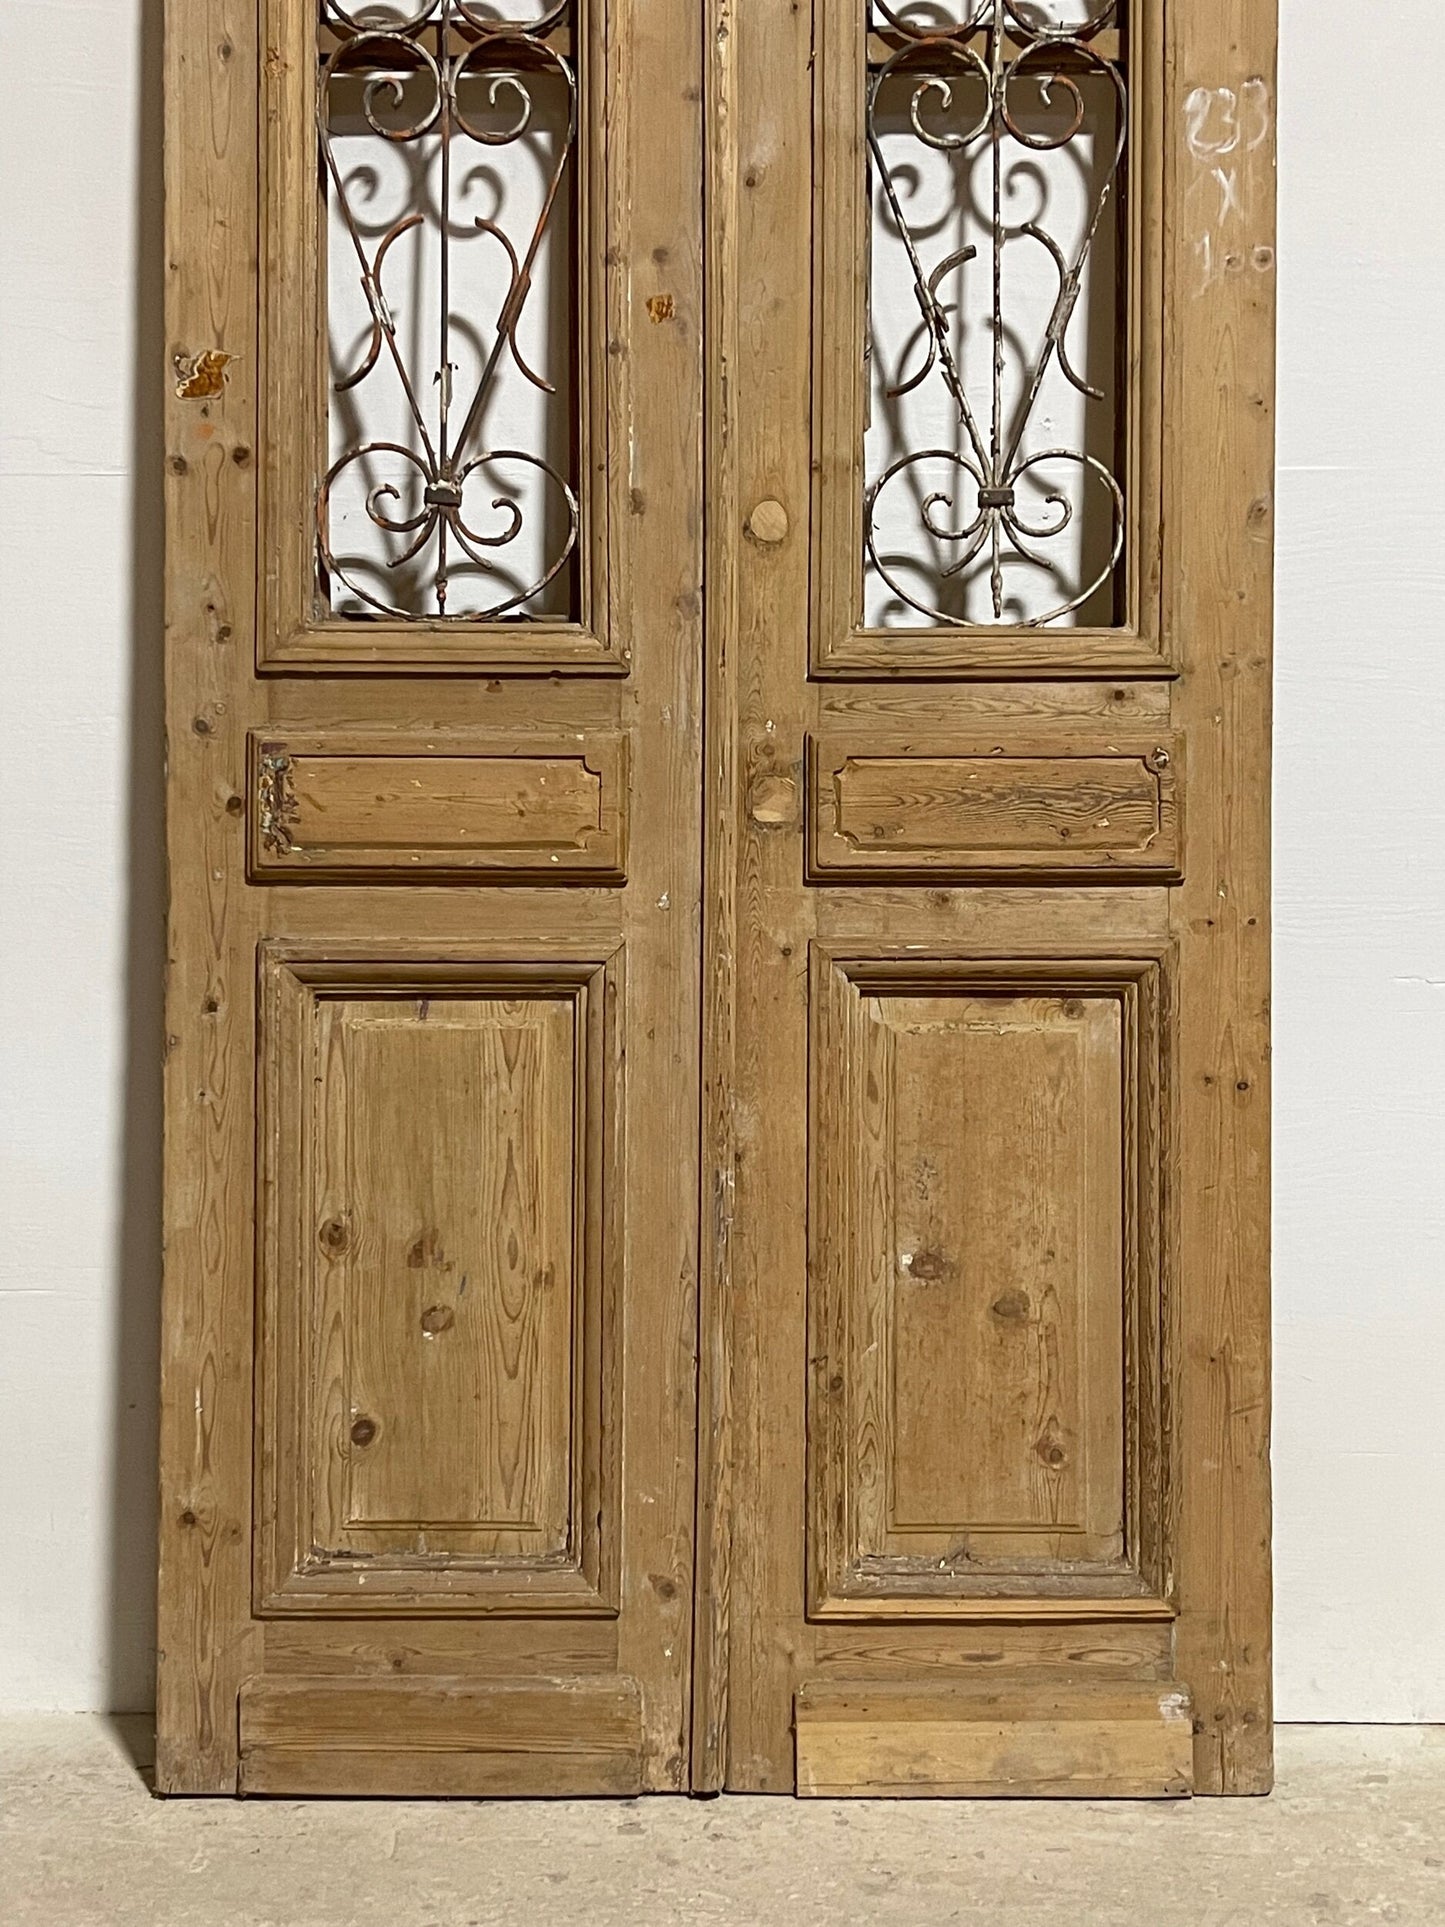 Antique french panel doors with metal (92 x 40) I038